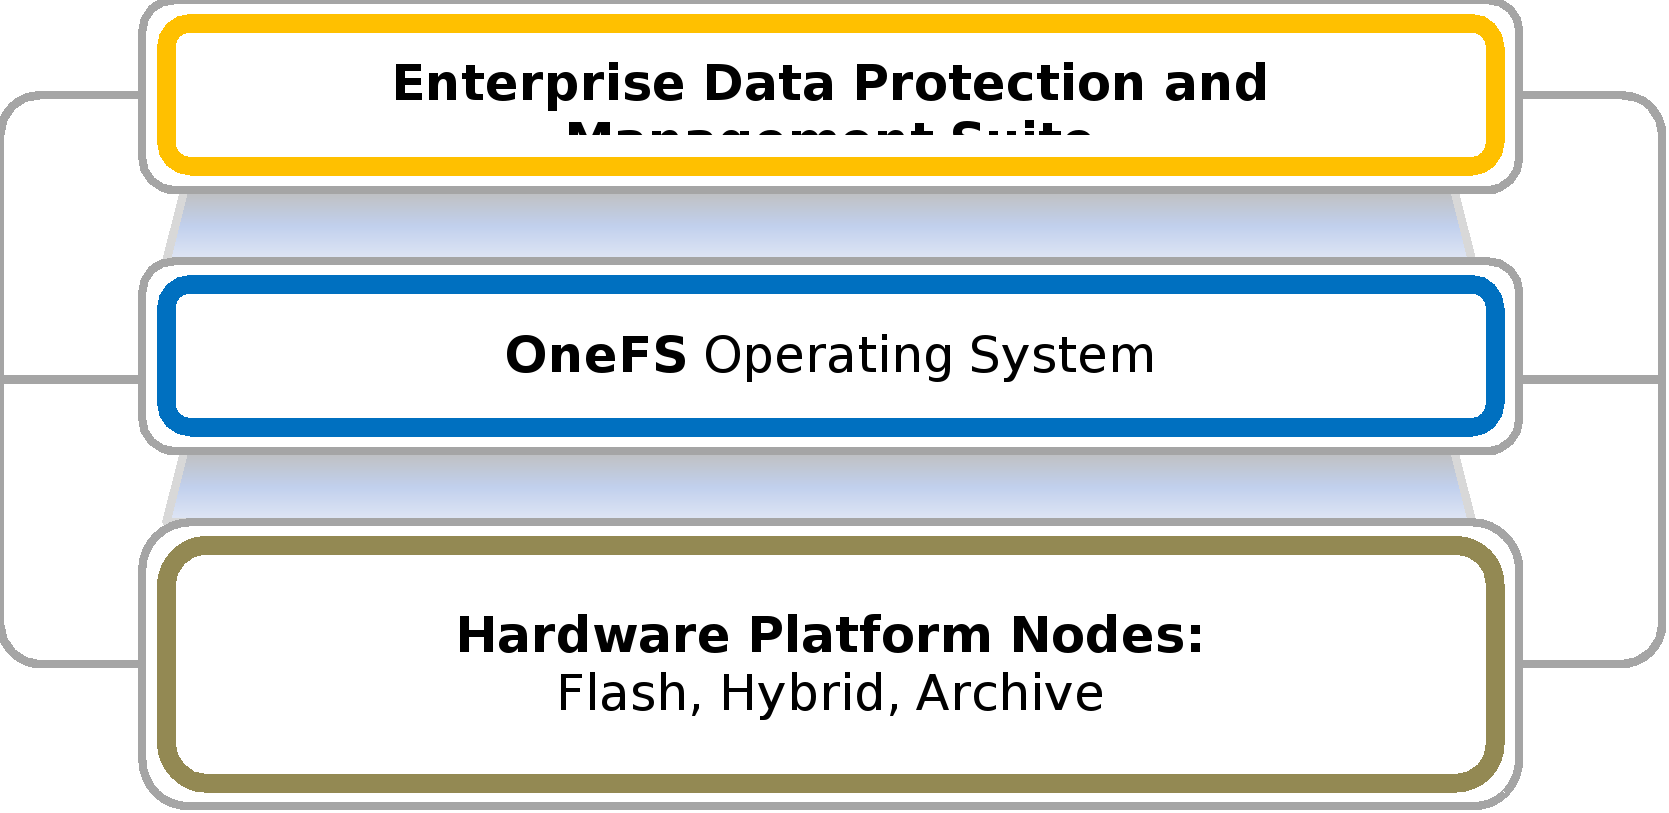 High-level architectural diagram showing the PowerScale stack, with the hardware platform layer, or substrate, the OneFS OS and file system above, and the suite of data protection and storage management services on top.